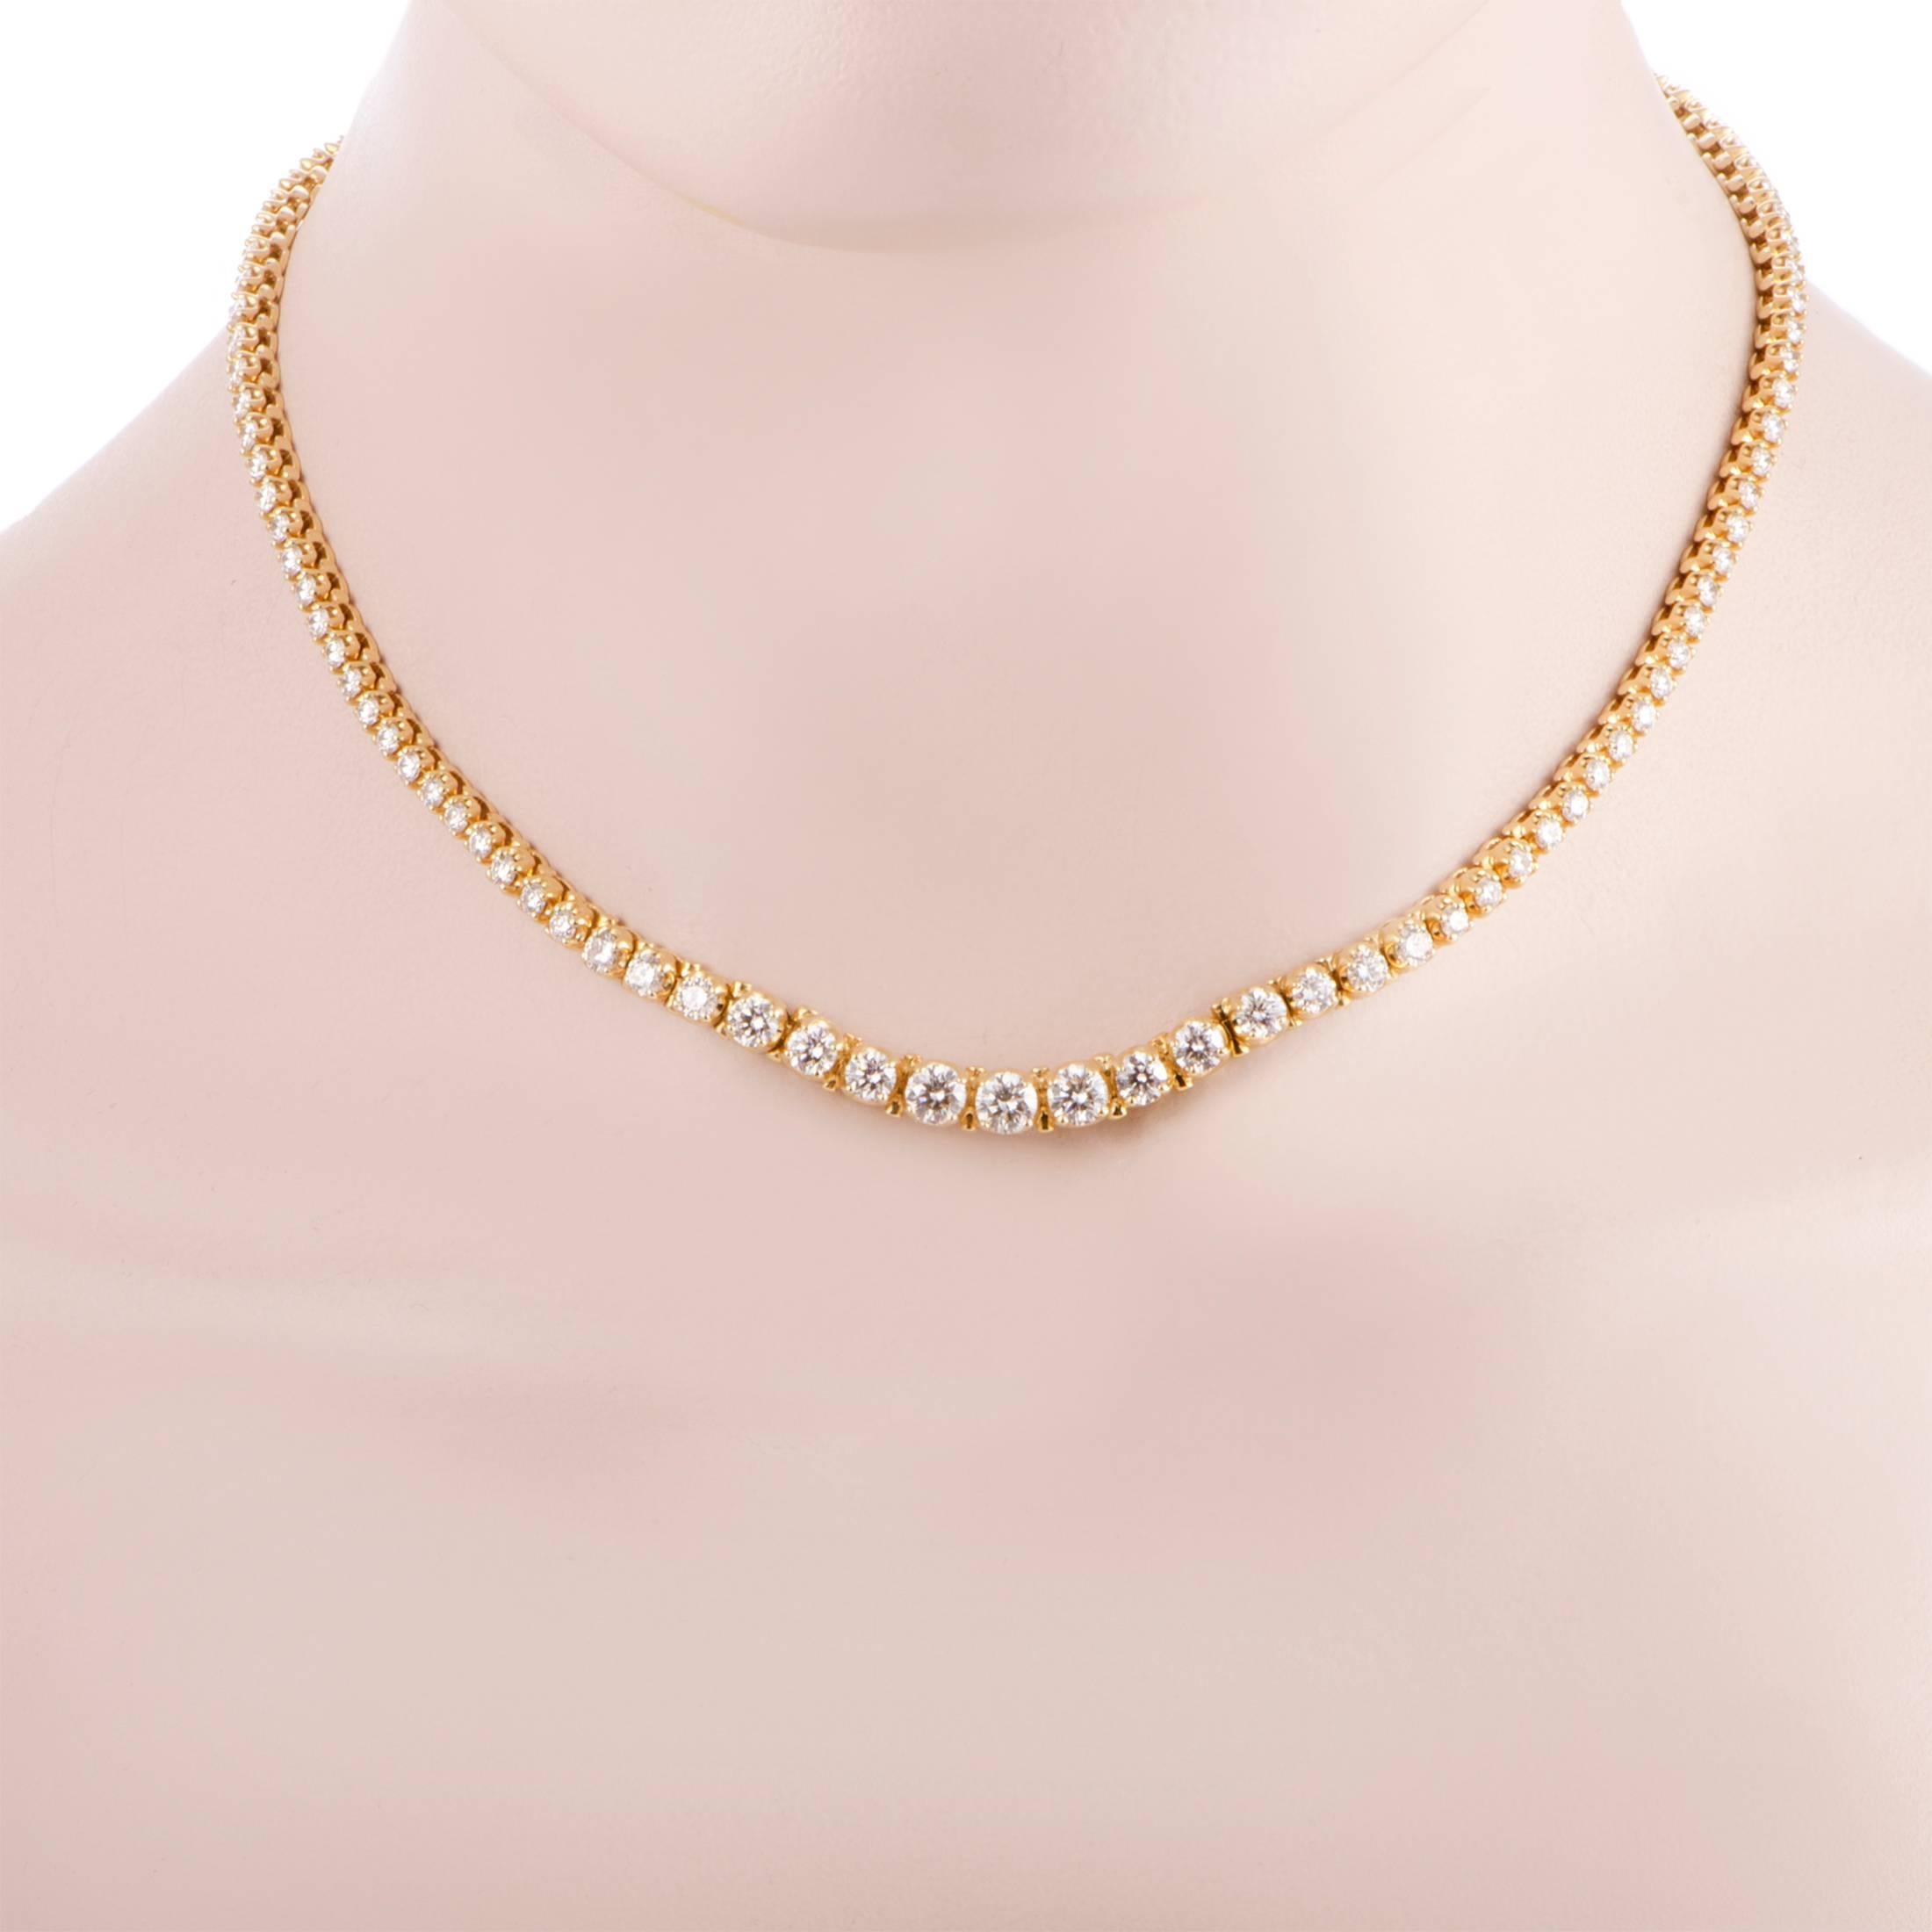 If you are looking for a jewelry piece that will feature classic elegant design with luxurious décor that is eye-catching but at the same time classy and tasteful, this tennis necklace will make a perfect addition to your collection. It is made of